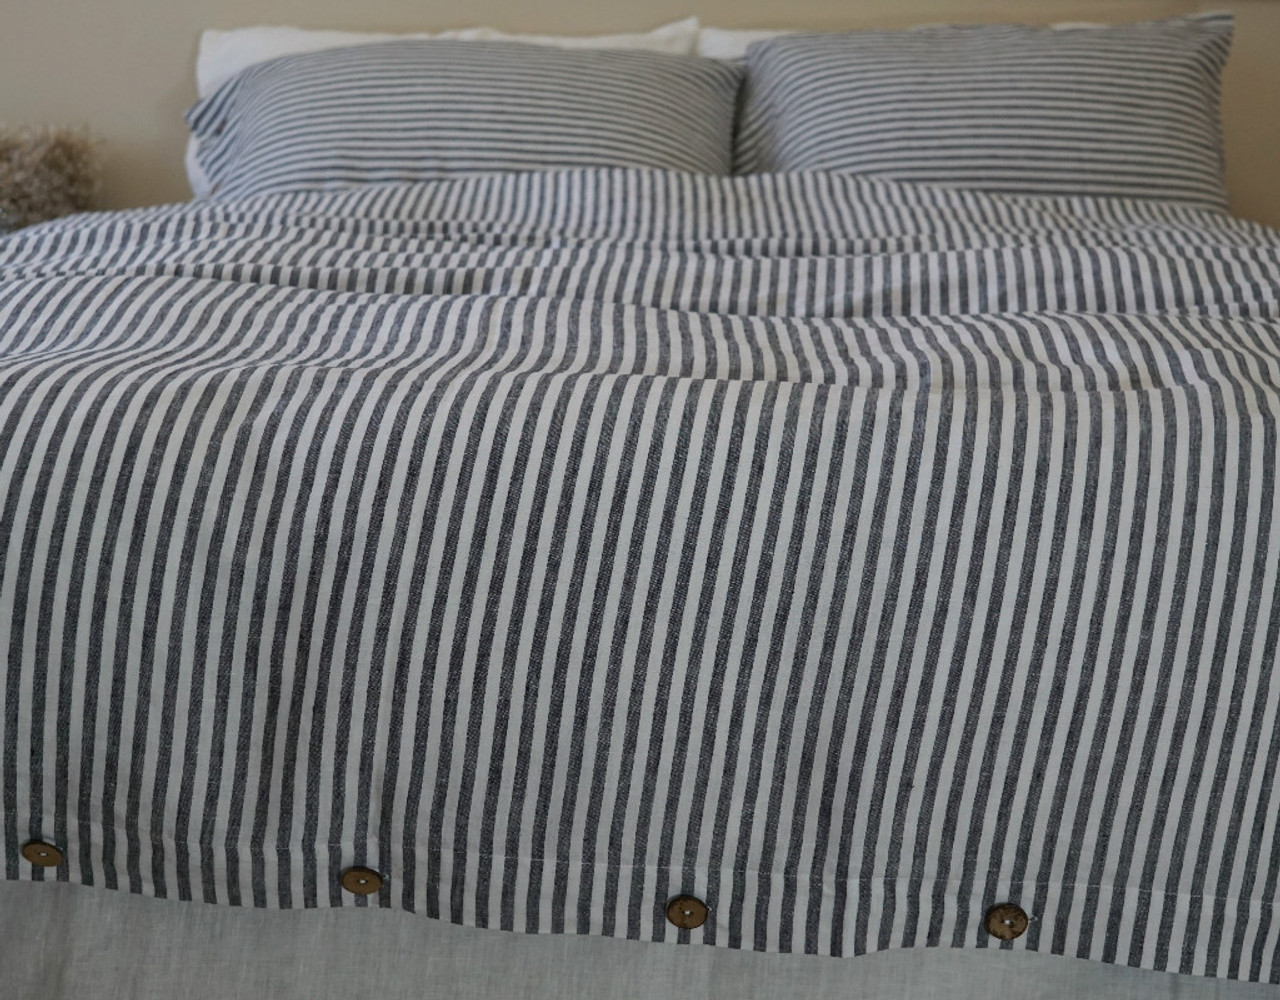 Navy and White Striped Duvet Cover Button Closure | Handmade by ...